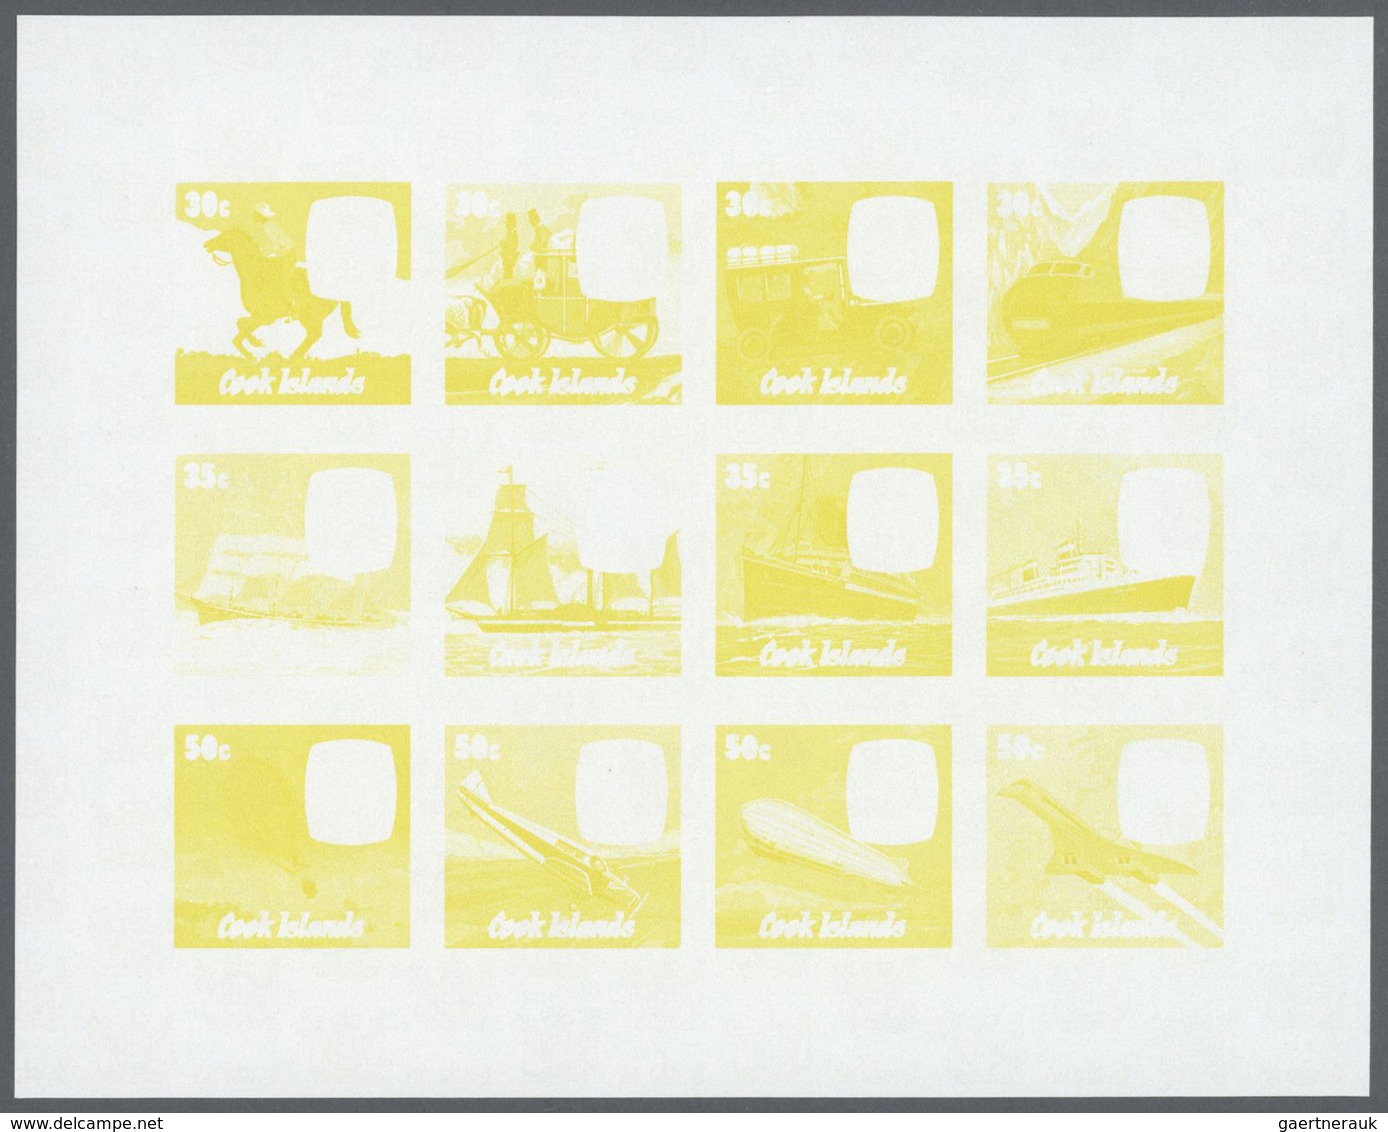 Thematik: Verkehr / traffic: 1979, Cook Islands. Progressive proofs for the souvenir sheet of the is